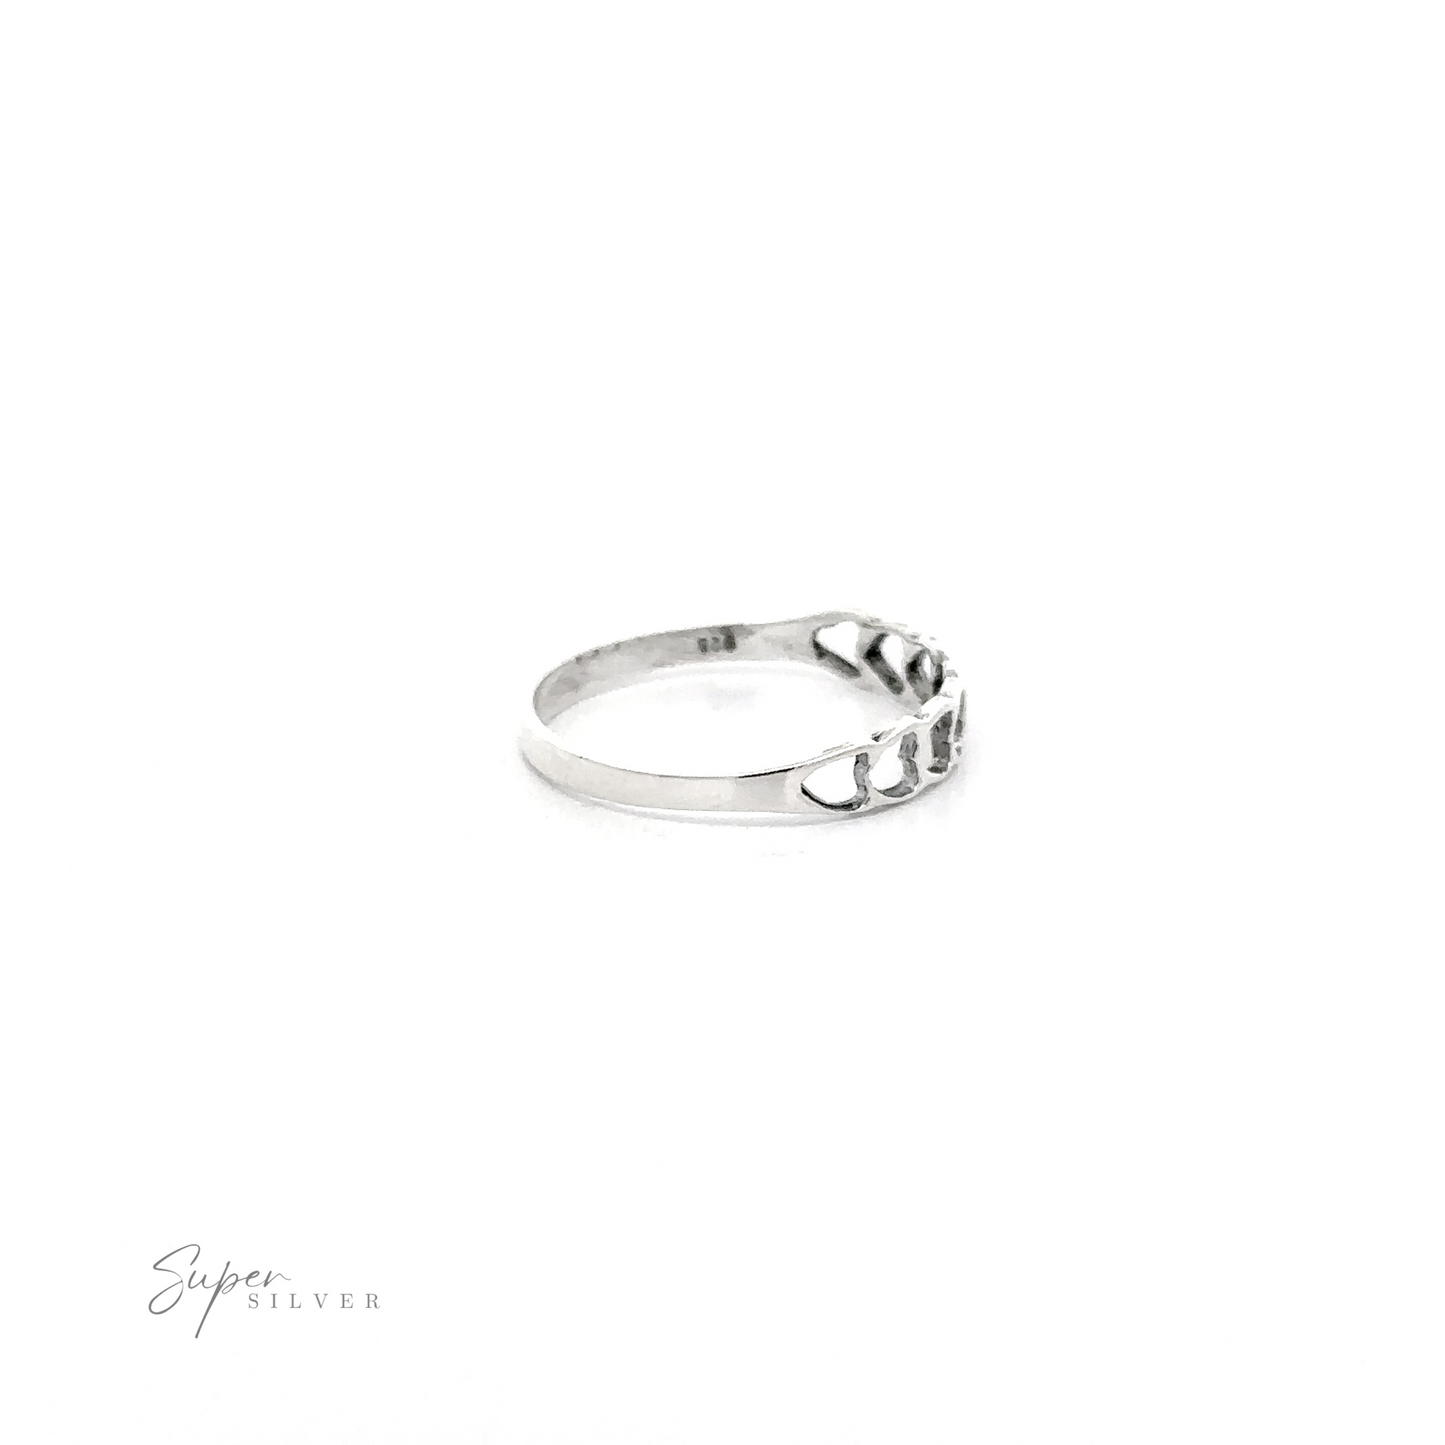 
                  
                    A Delicate Heart Cutout Band with a chain-link design detail on a white background. The text "super silver" is written in stylish script at the bottom.
                  
                